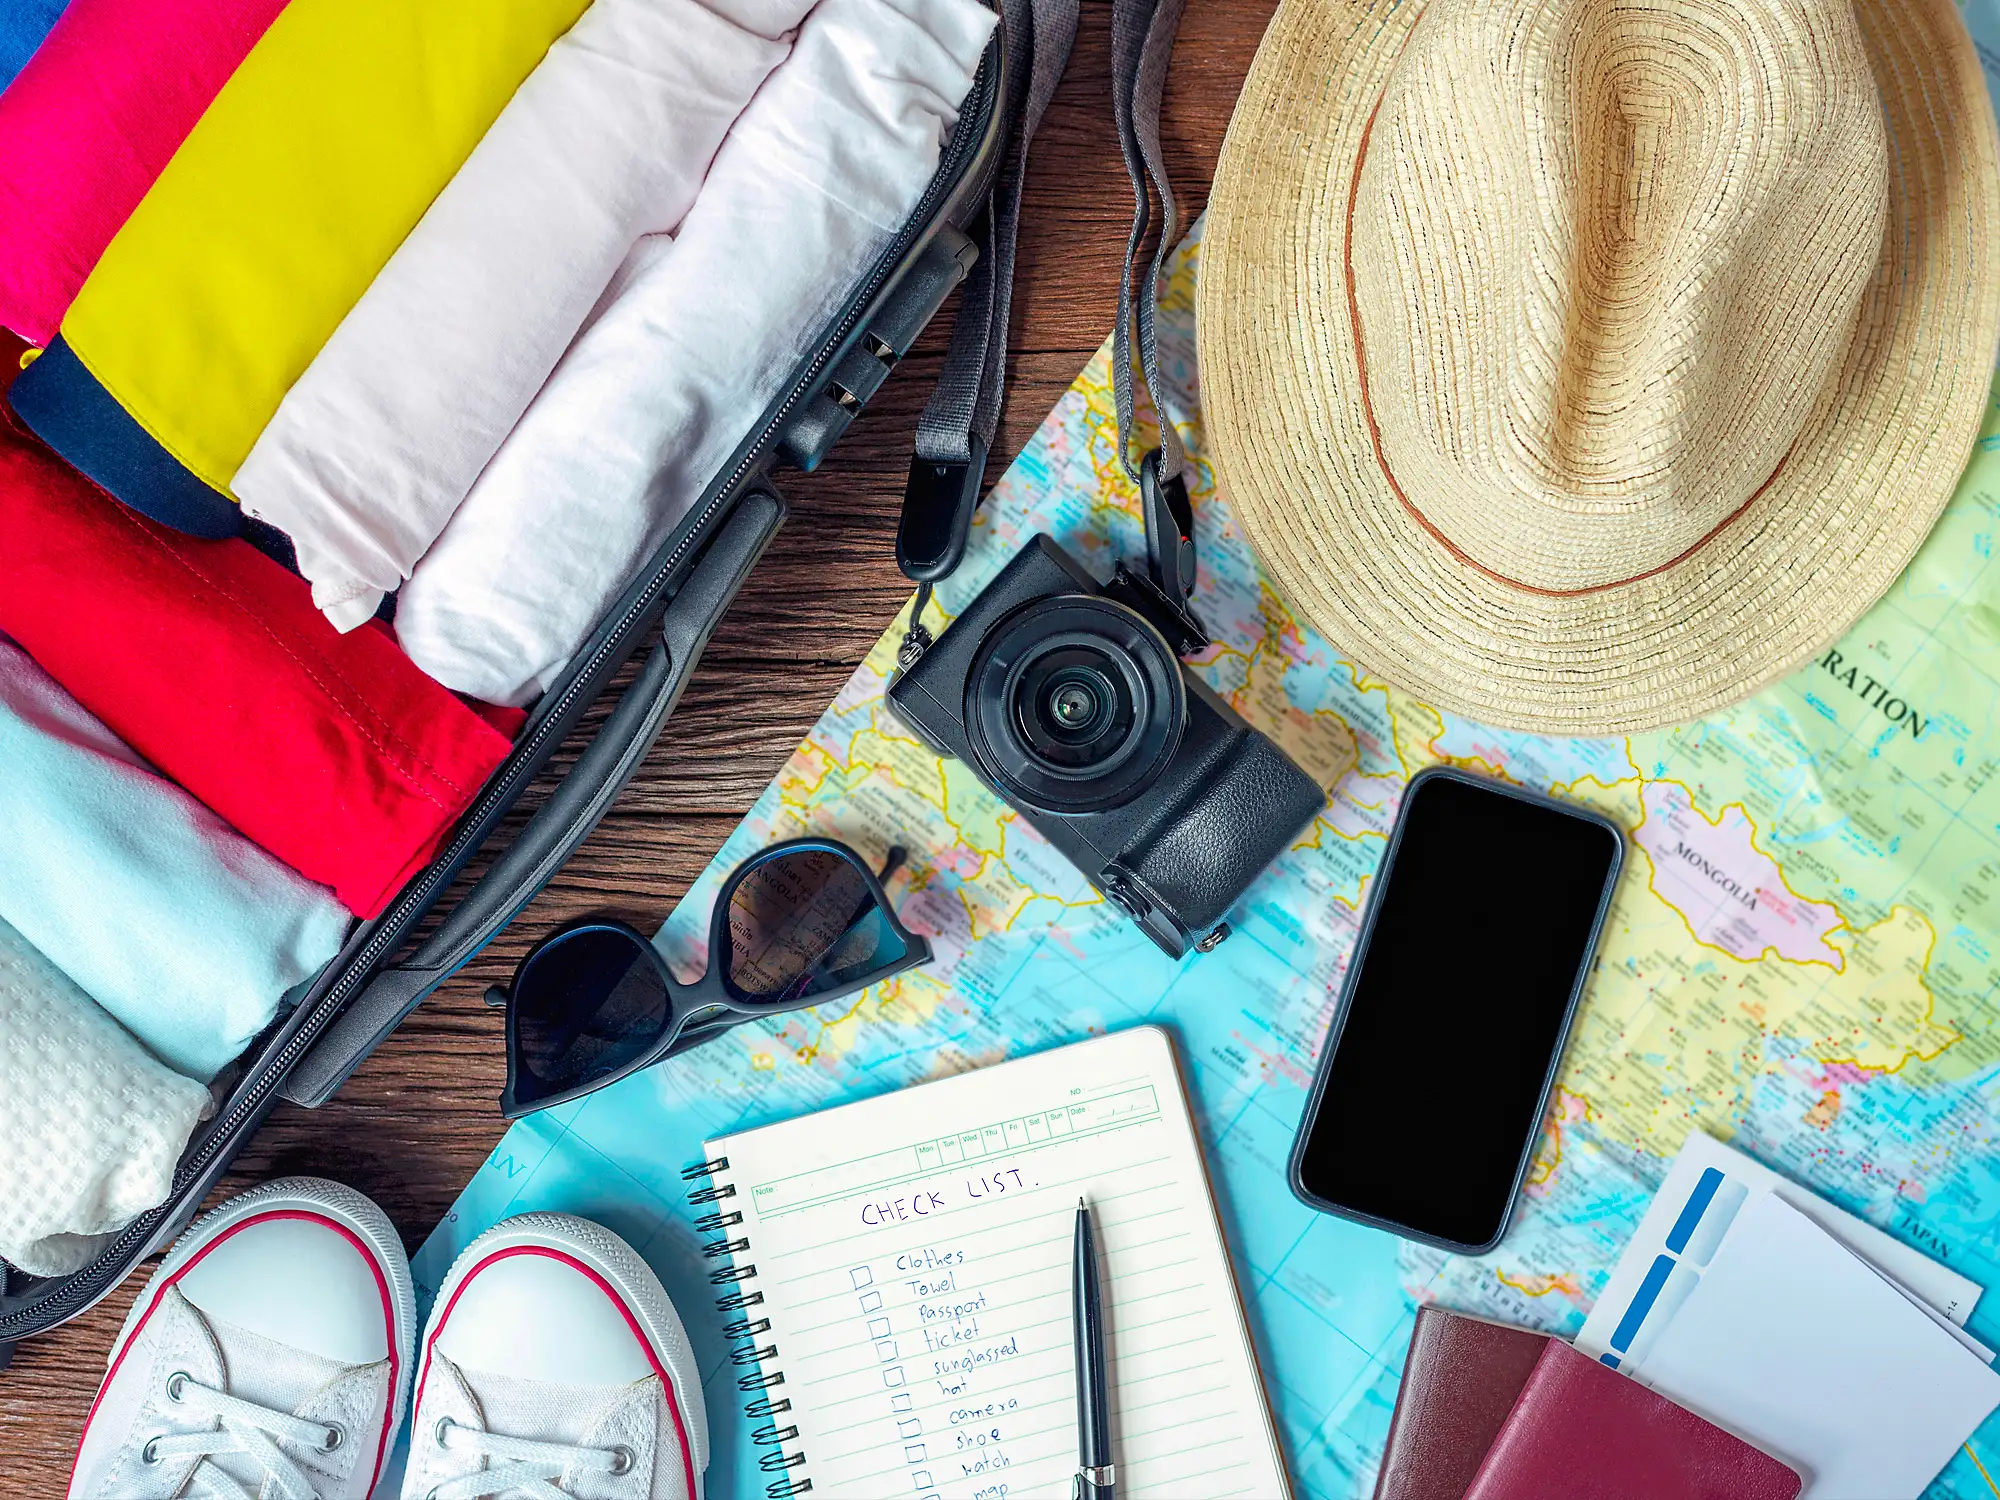 10 Travel Essentials You Need To Make Every Trip Interesting